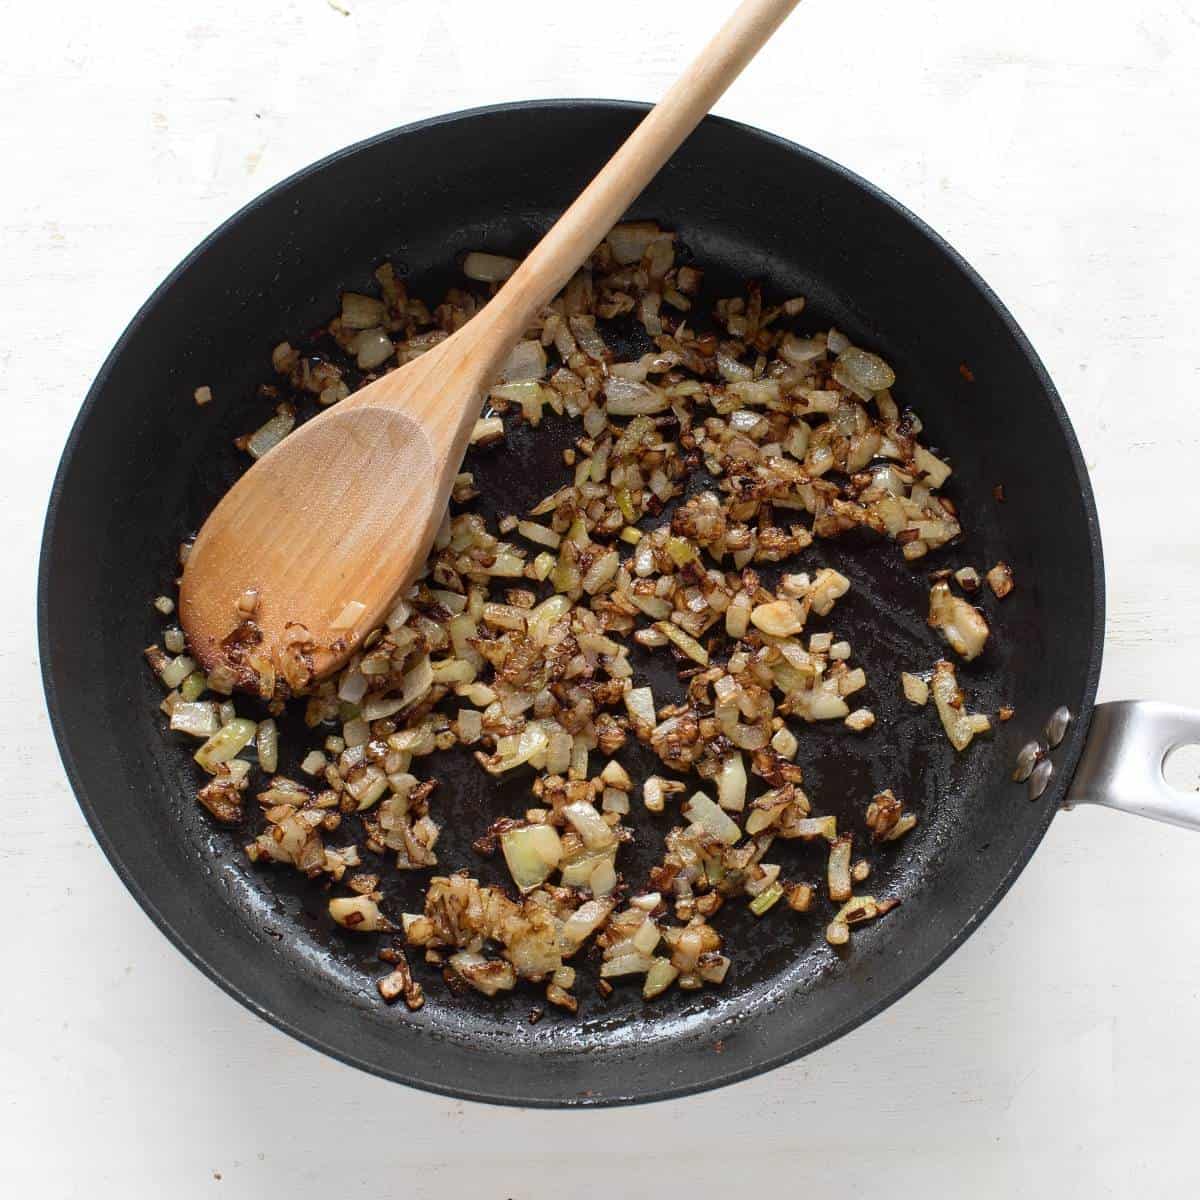 Caramelized onion in a black skillet, with wooden spoon.